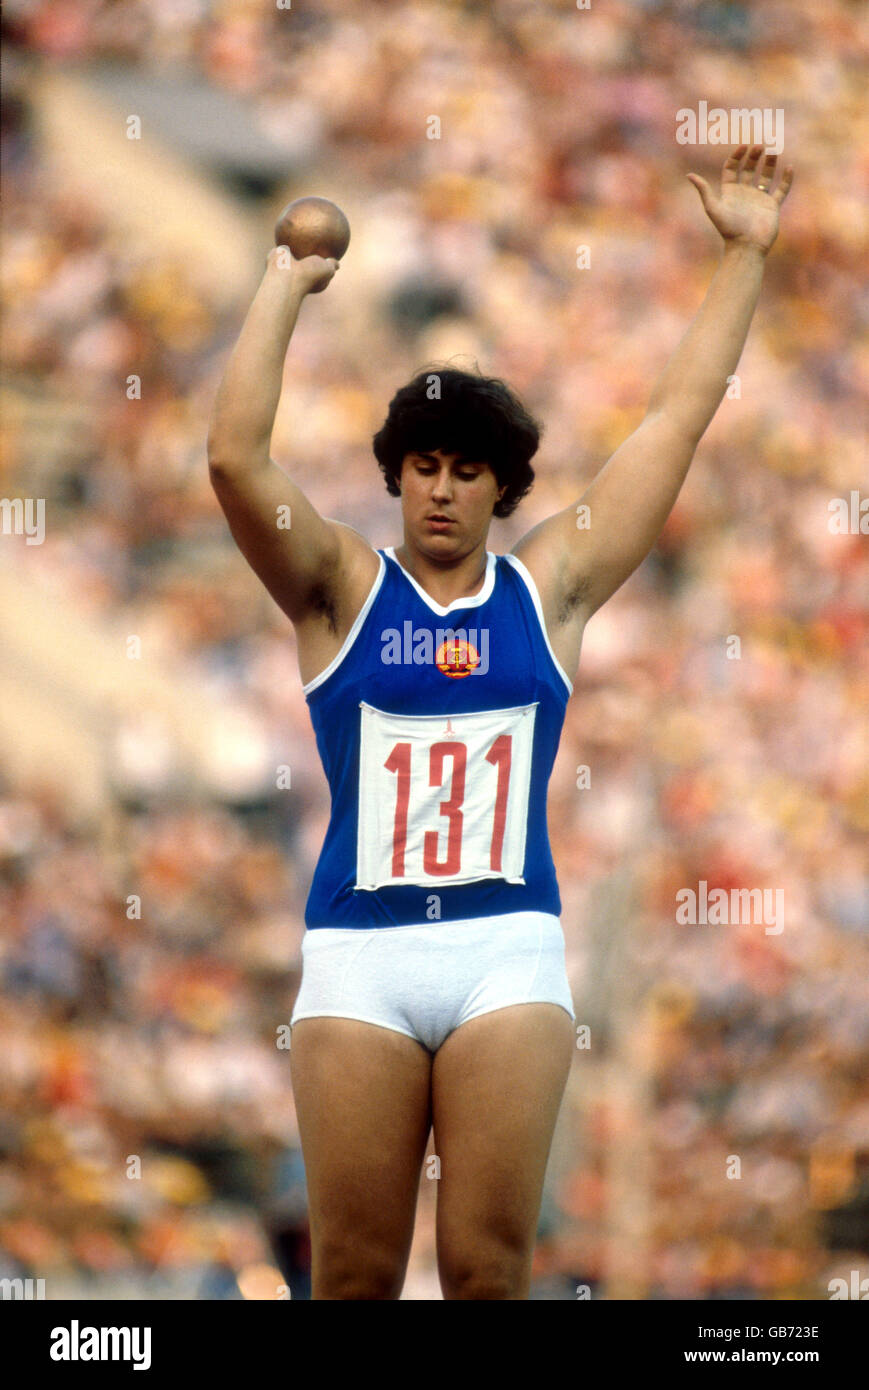 Athletics - Moscow Olympic Games - Women's Shot Put Stock Photo - Alamy